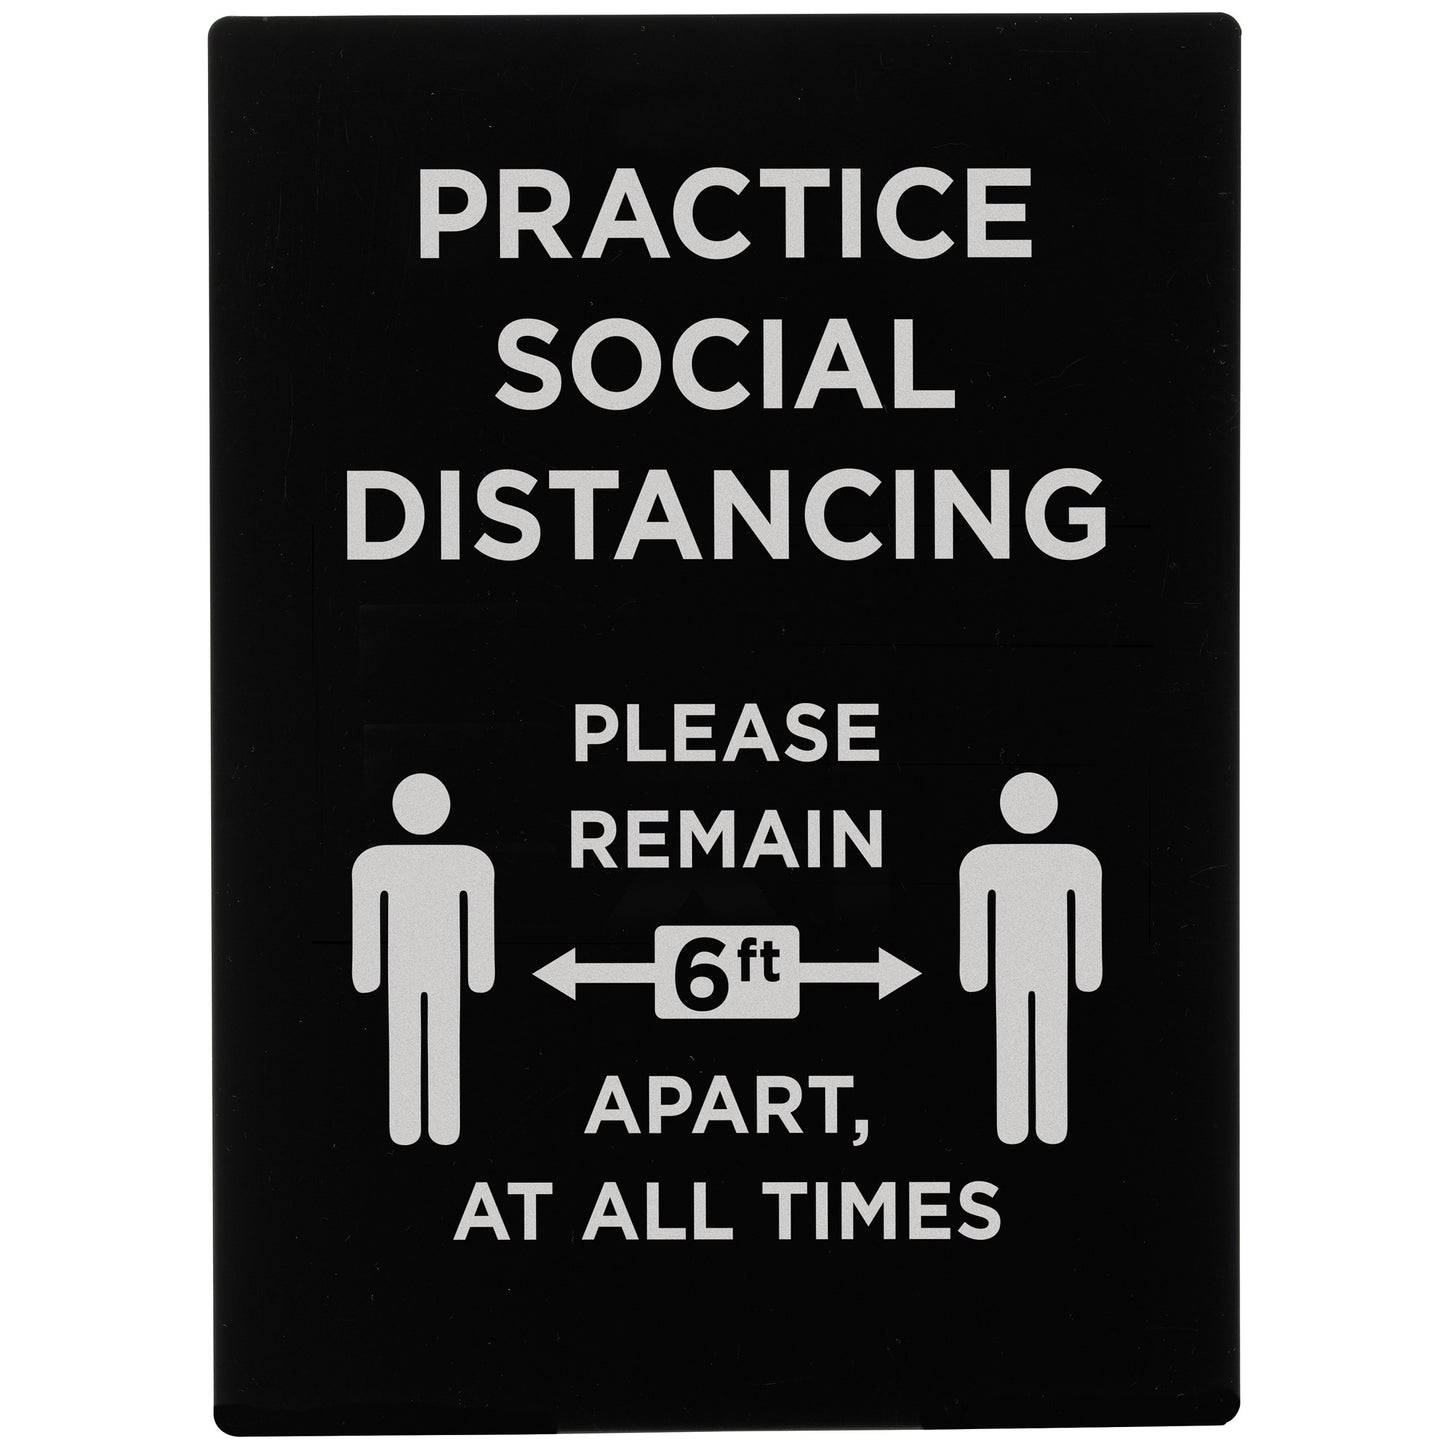 SGN-806 - Stanchion Frame Sign - SGN-806 - Practice Social Distancing